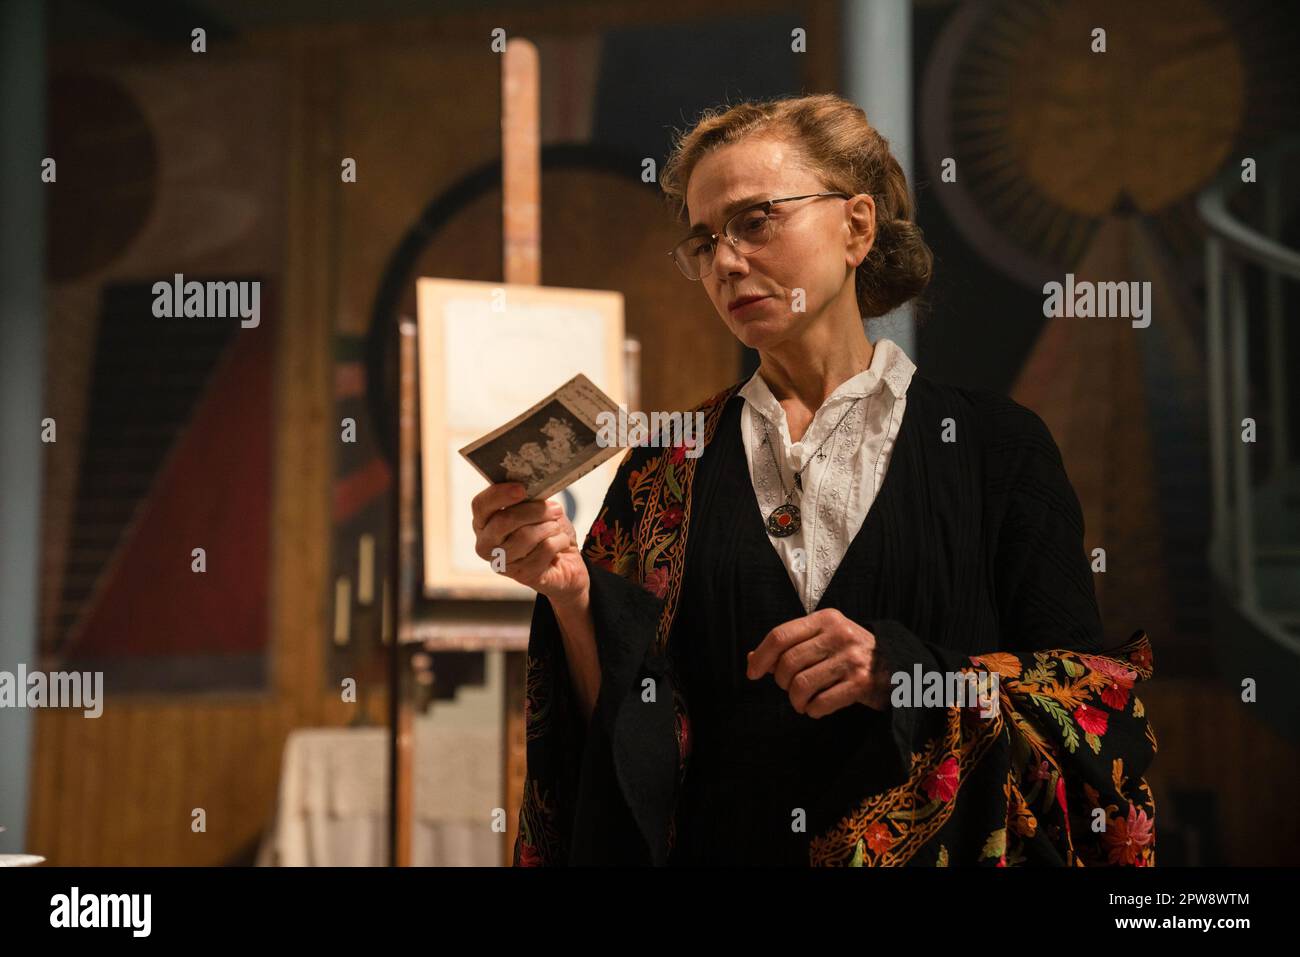 LENA OLIN in HILMA (2022), directed by LASSE HALLSTROM. Credit: Nordic Entertainment Group / Album Stock Photo